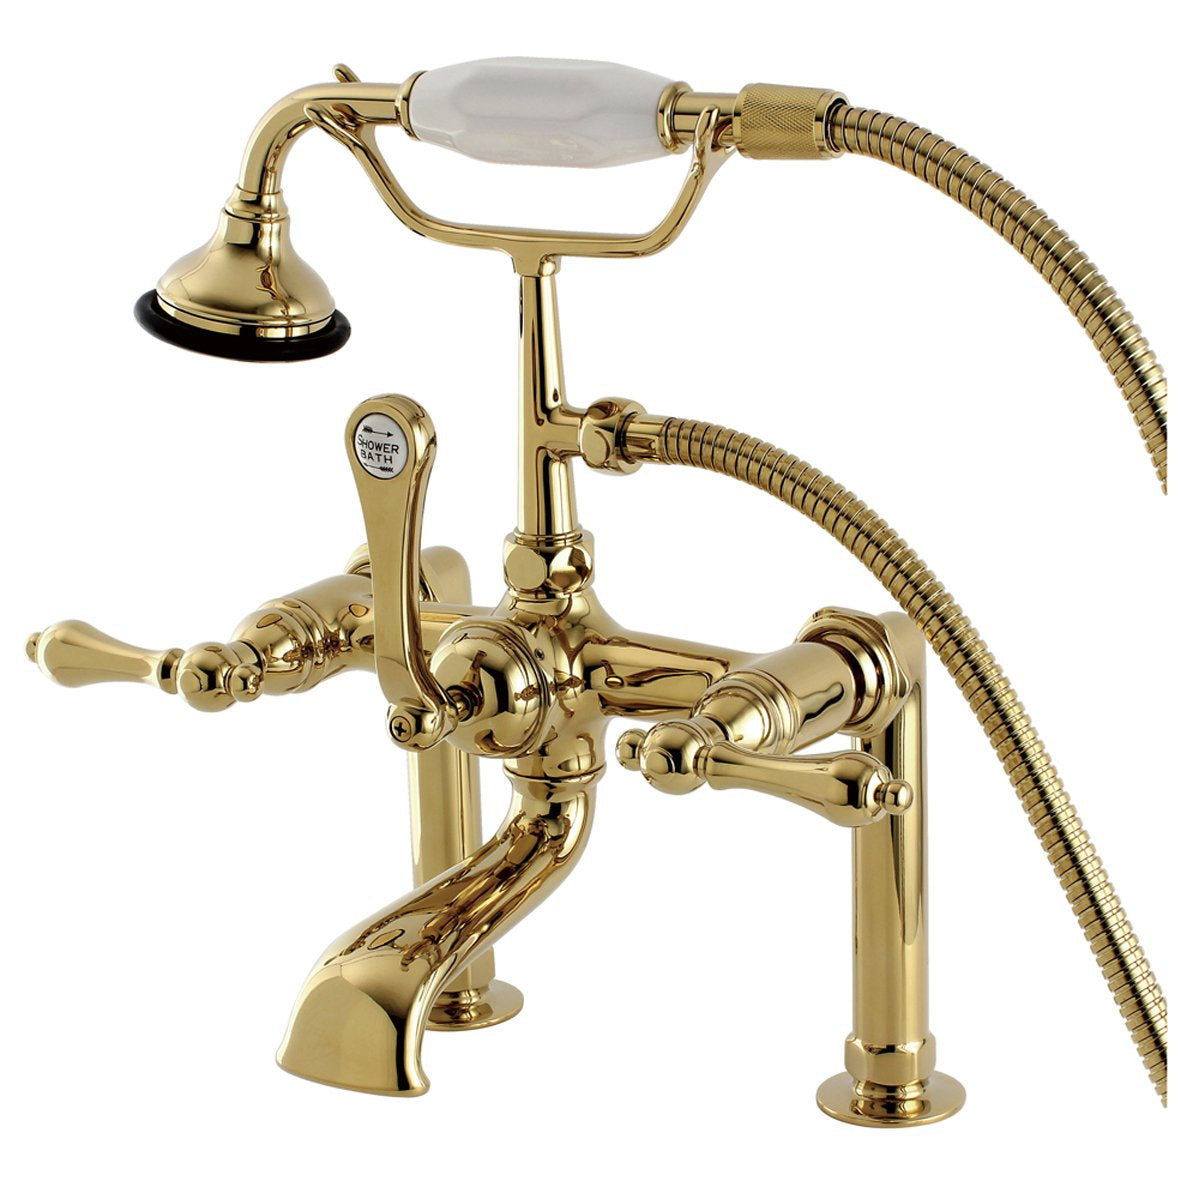 Kingston Brass Aqua Eden AE103T2 Vintage Deck Mount Clawfoot Tub Faucet in Polished Brass-Tub Faucets-Free Shipping-Directsinks.